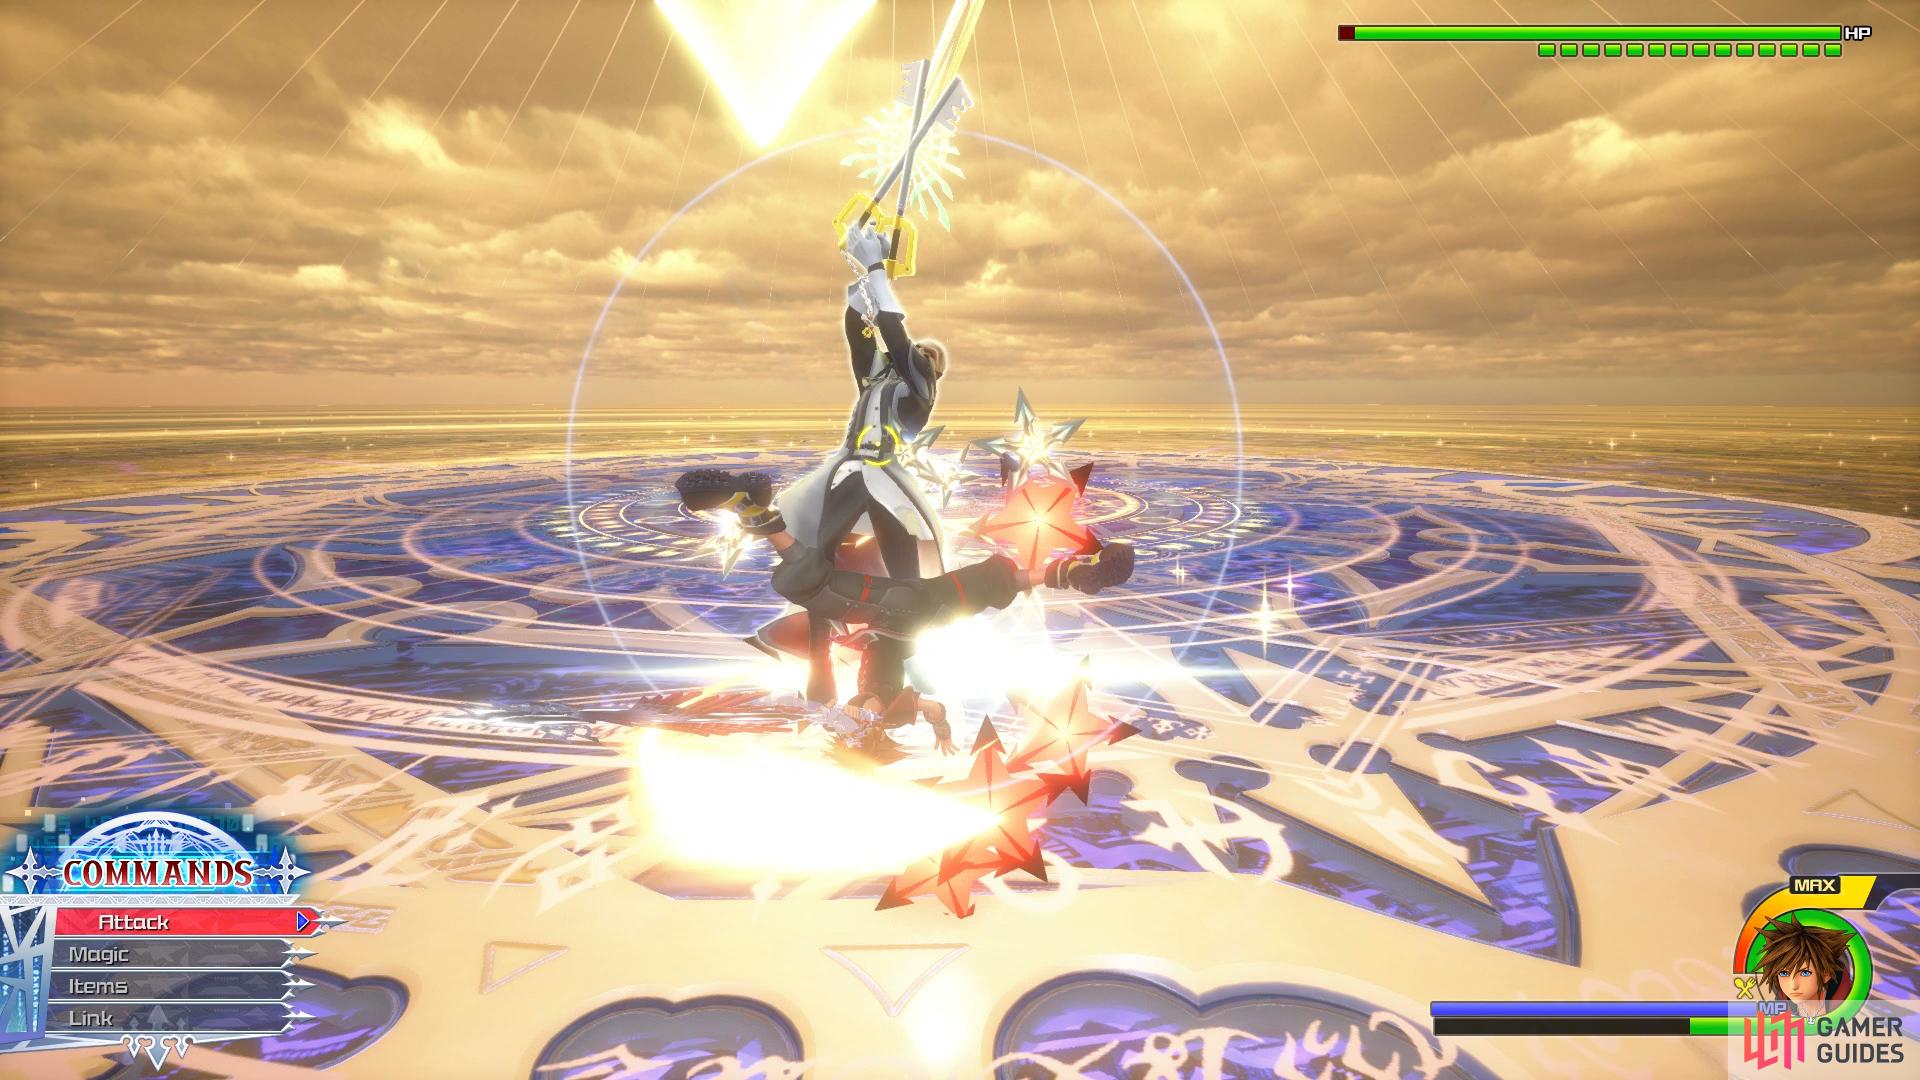 you can block and counter his Keyblade Combo